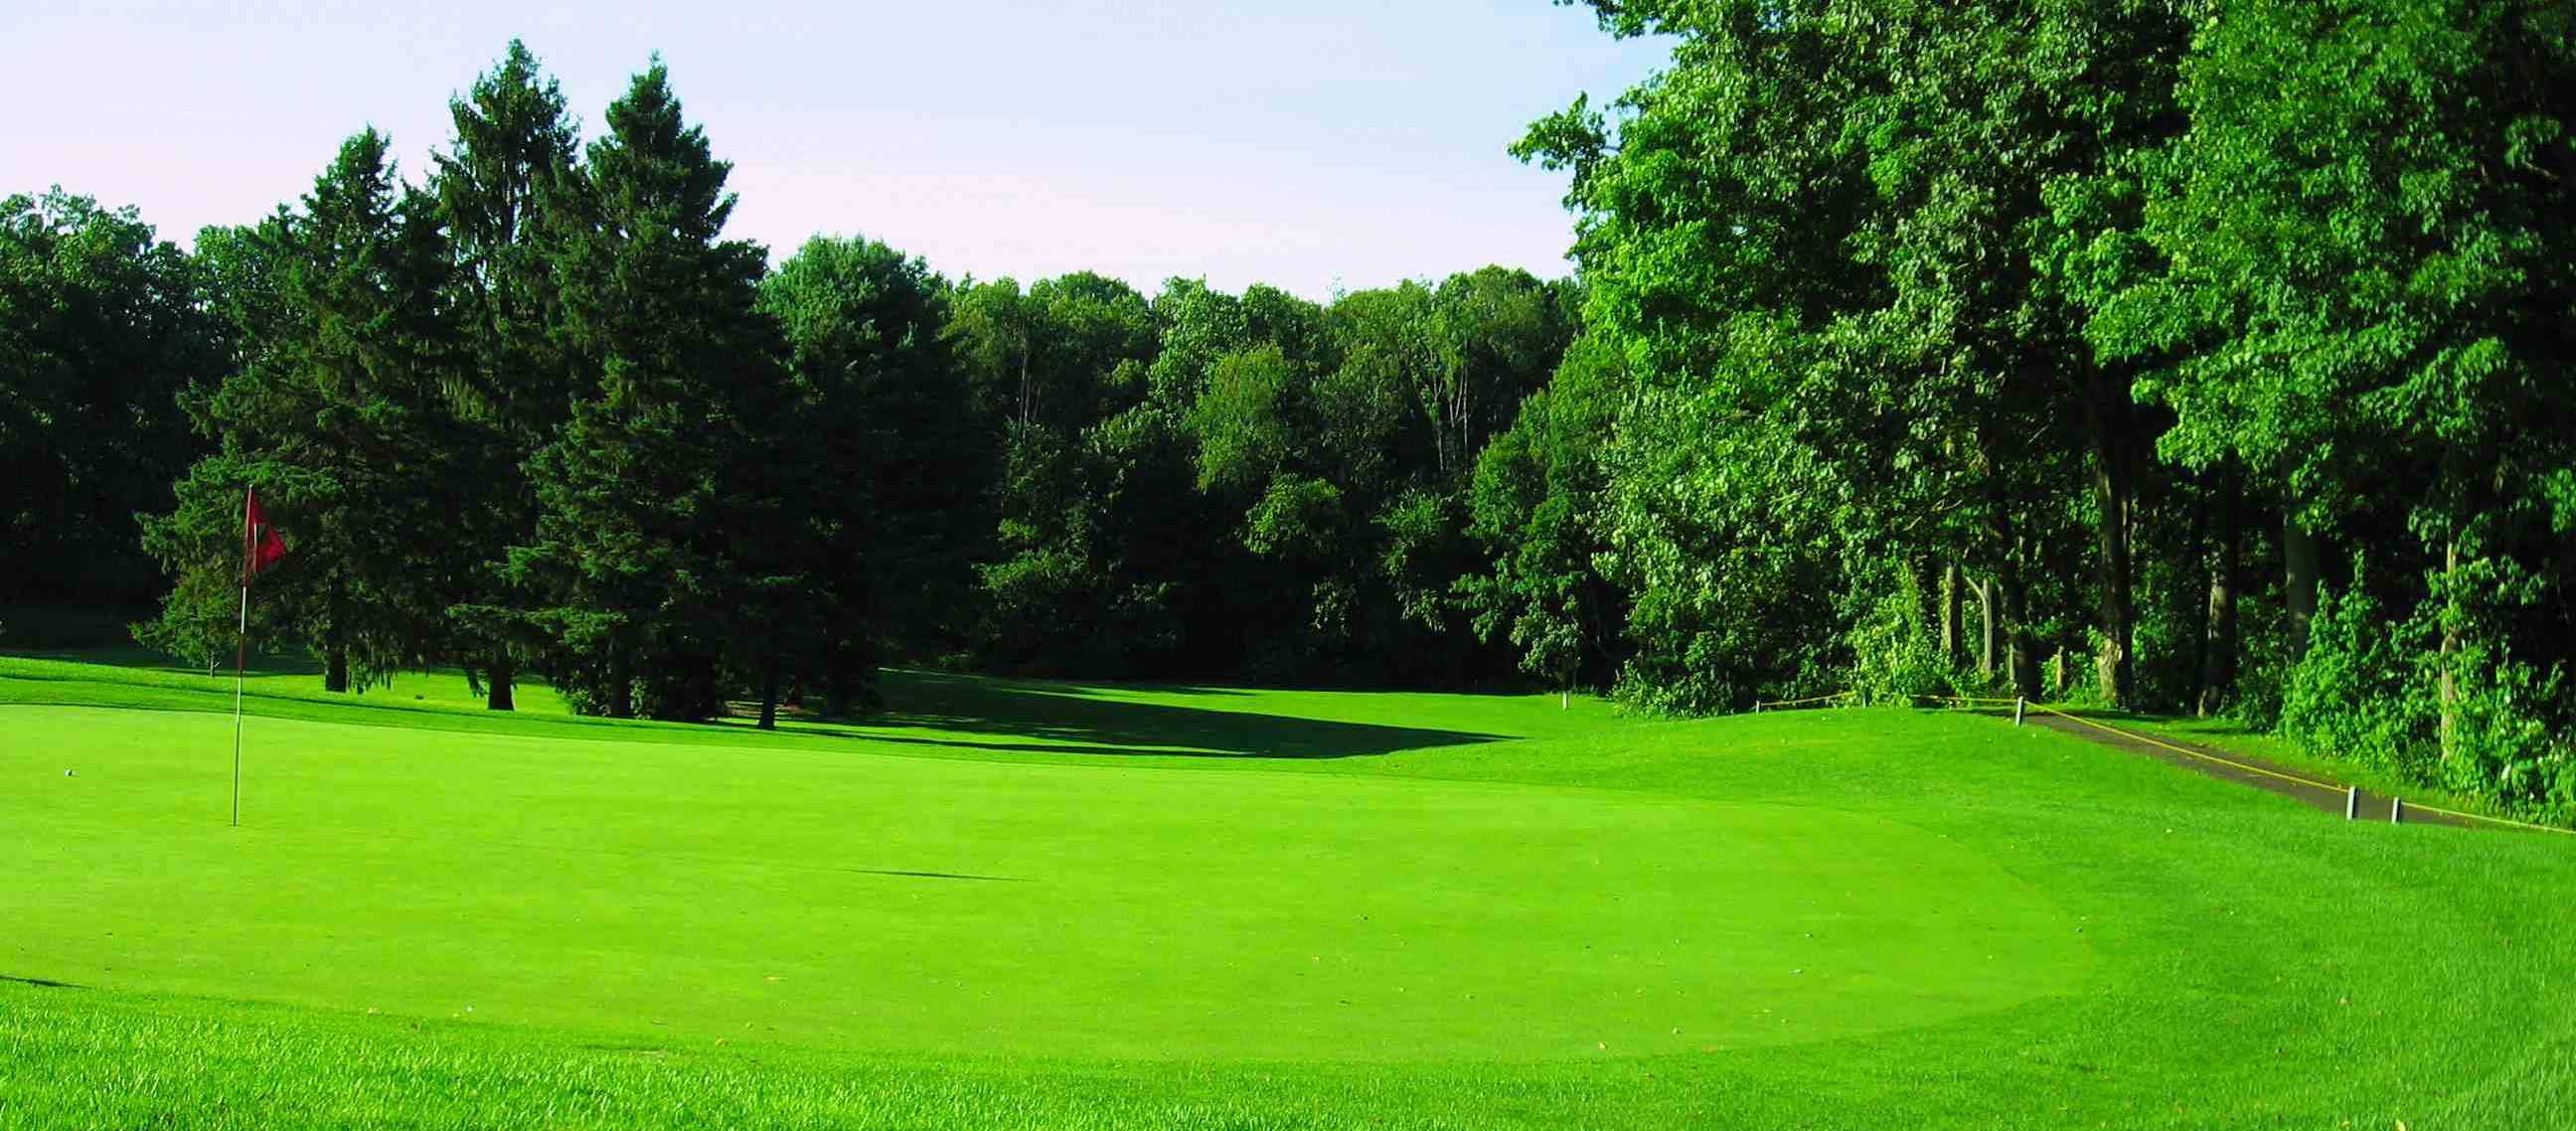 Free download Golf Course Green 1593 Hd Wallpapers in Sports